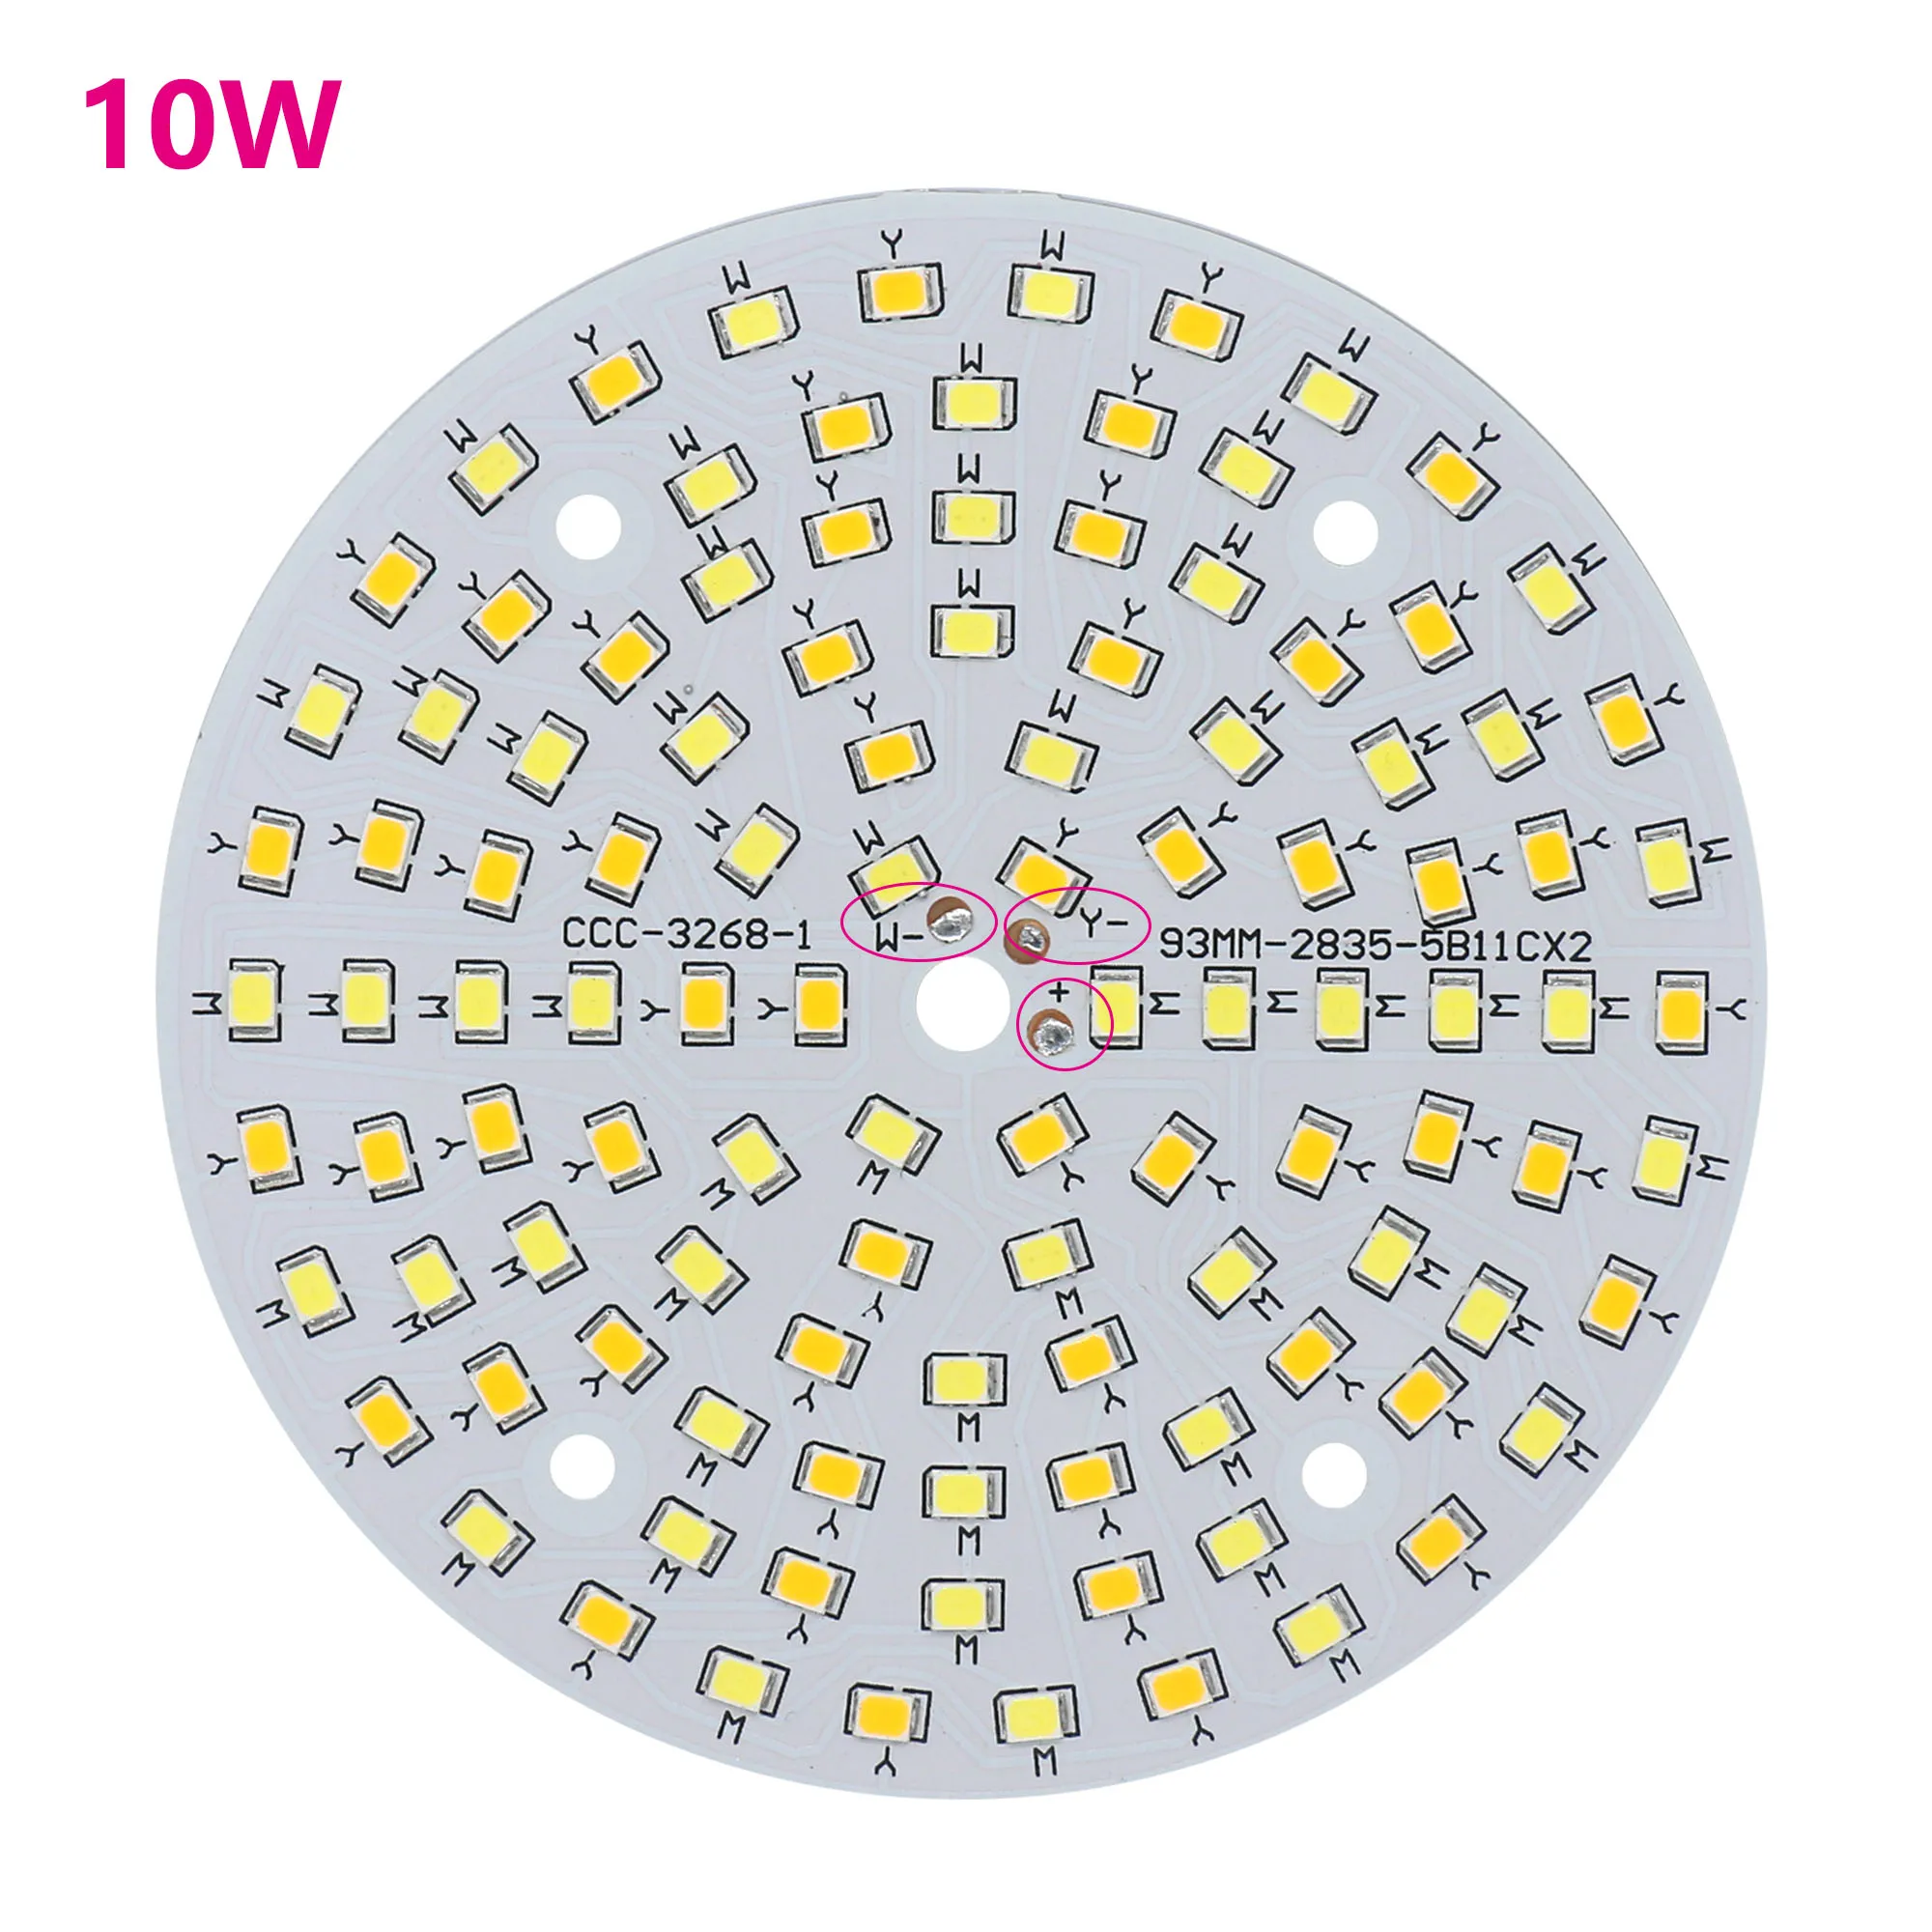 SMD2835 Two-color chip 10W 18W 24W 36W LED COB Lamp Beads 250mA Floodlight For Spotlight Panel light Convert color Round shape images - 6